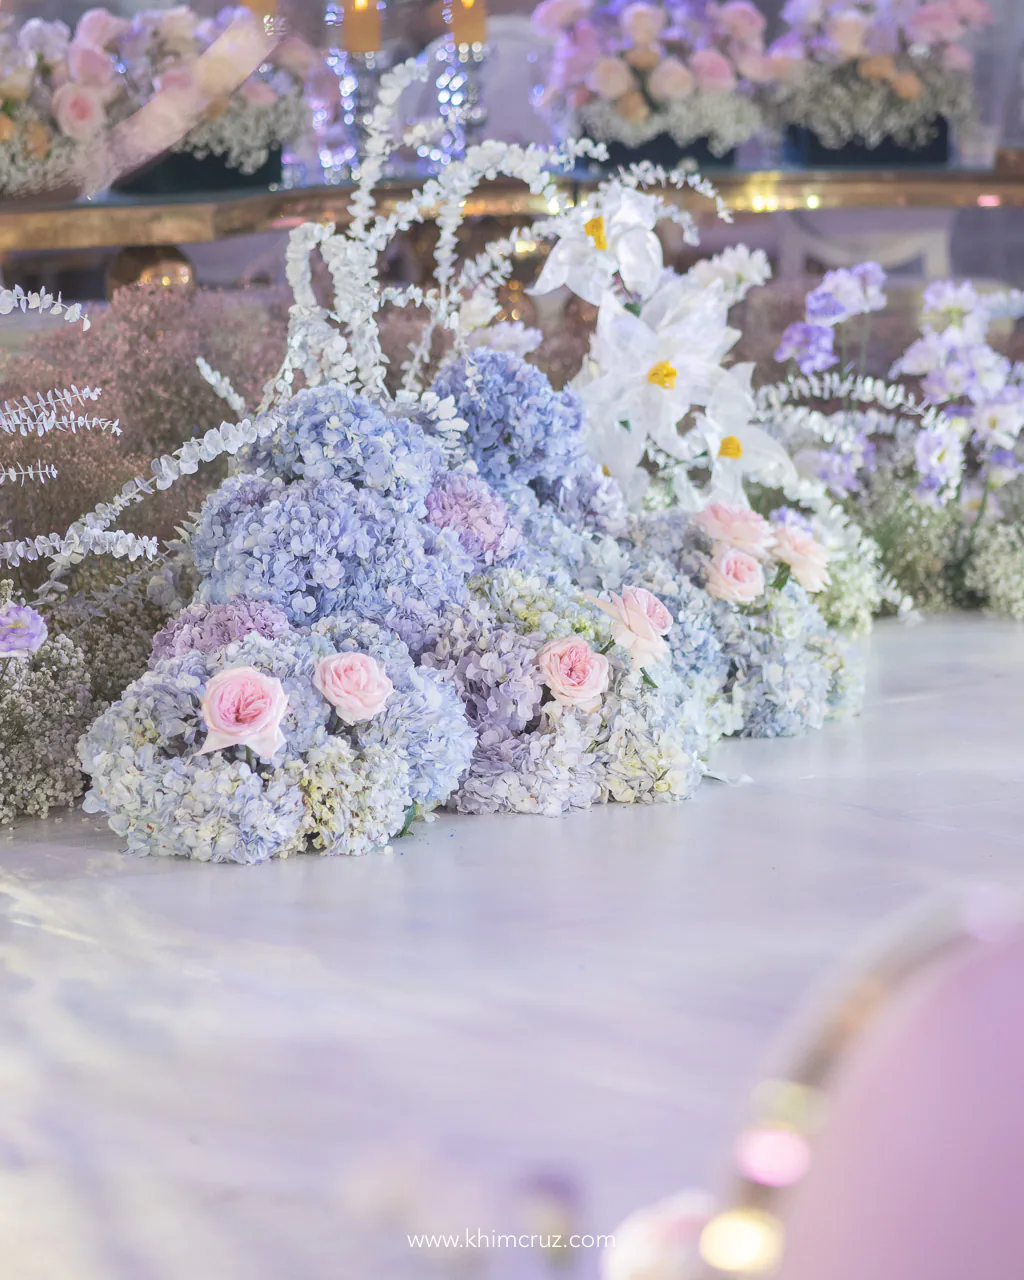 beautiful flowers at the aisle for a dreamy garden theme wedding reception